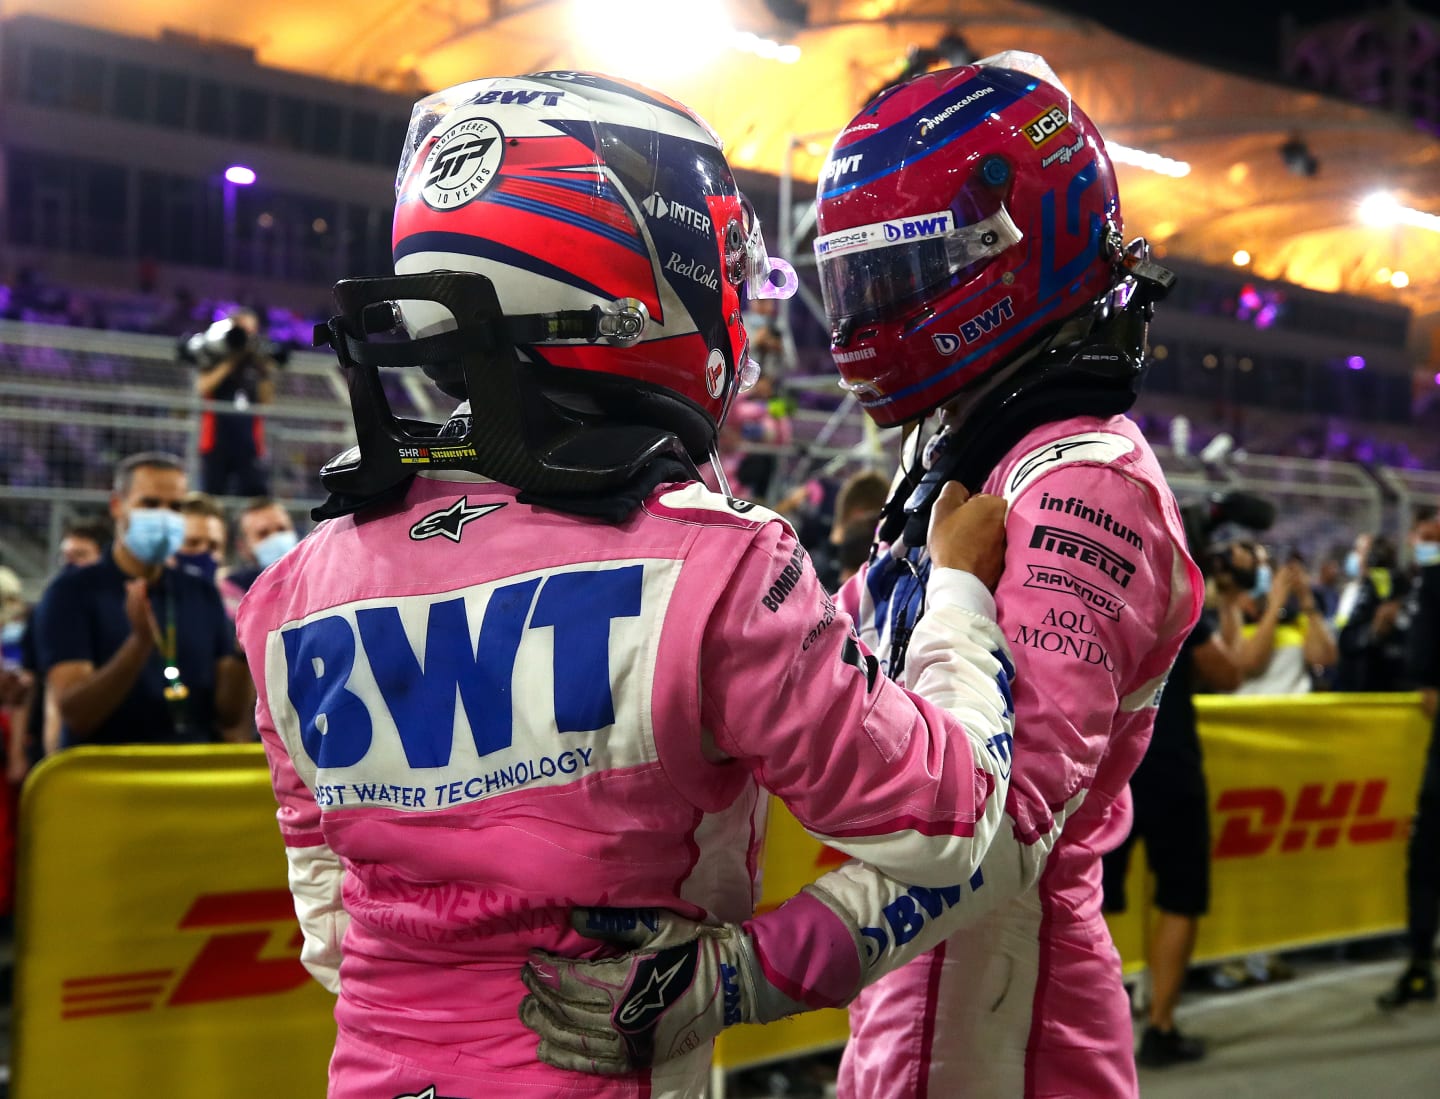 BAHRAIN, BAHRAIN - DECEMBER 06: Race winner Sergio Perez of Mexico and Racing Point and third placed Lance Stroll of Canada and Racing Point celebrate in parc ferme during the F1 Grand Prix of Sakhir at Bahrain International Circuit on December 06, 2020 in Bahrain, Bahrain. (Photo by Bryn Lennon/Getty Images)